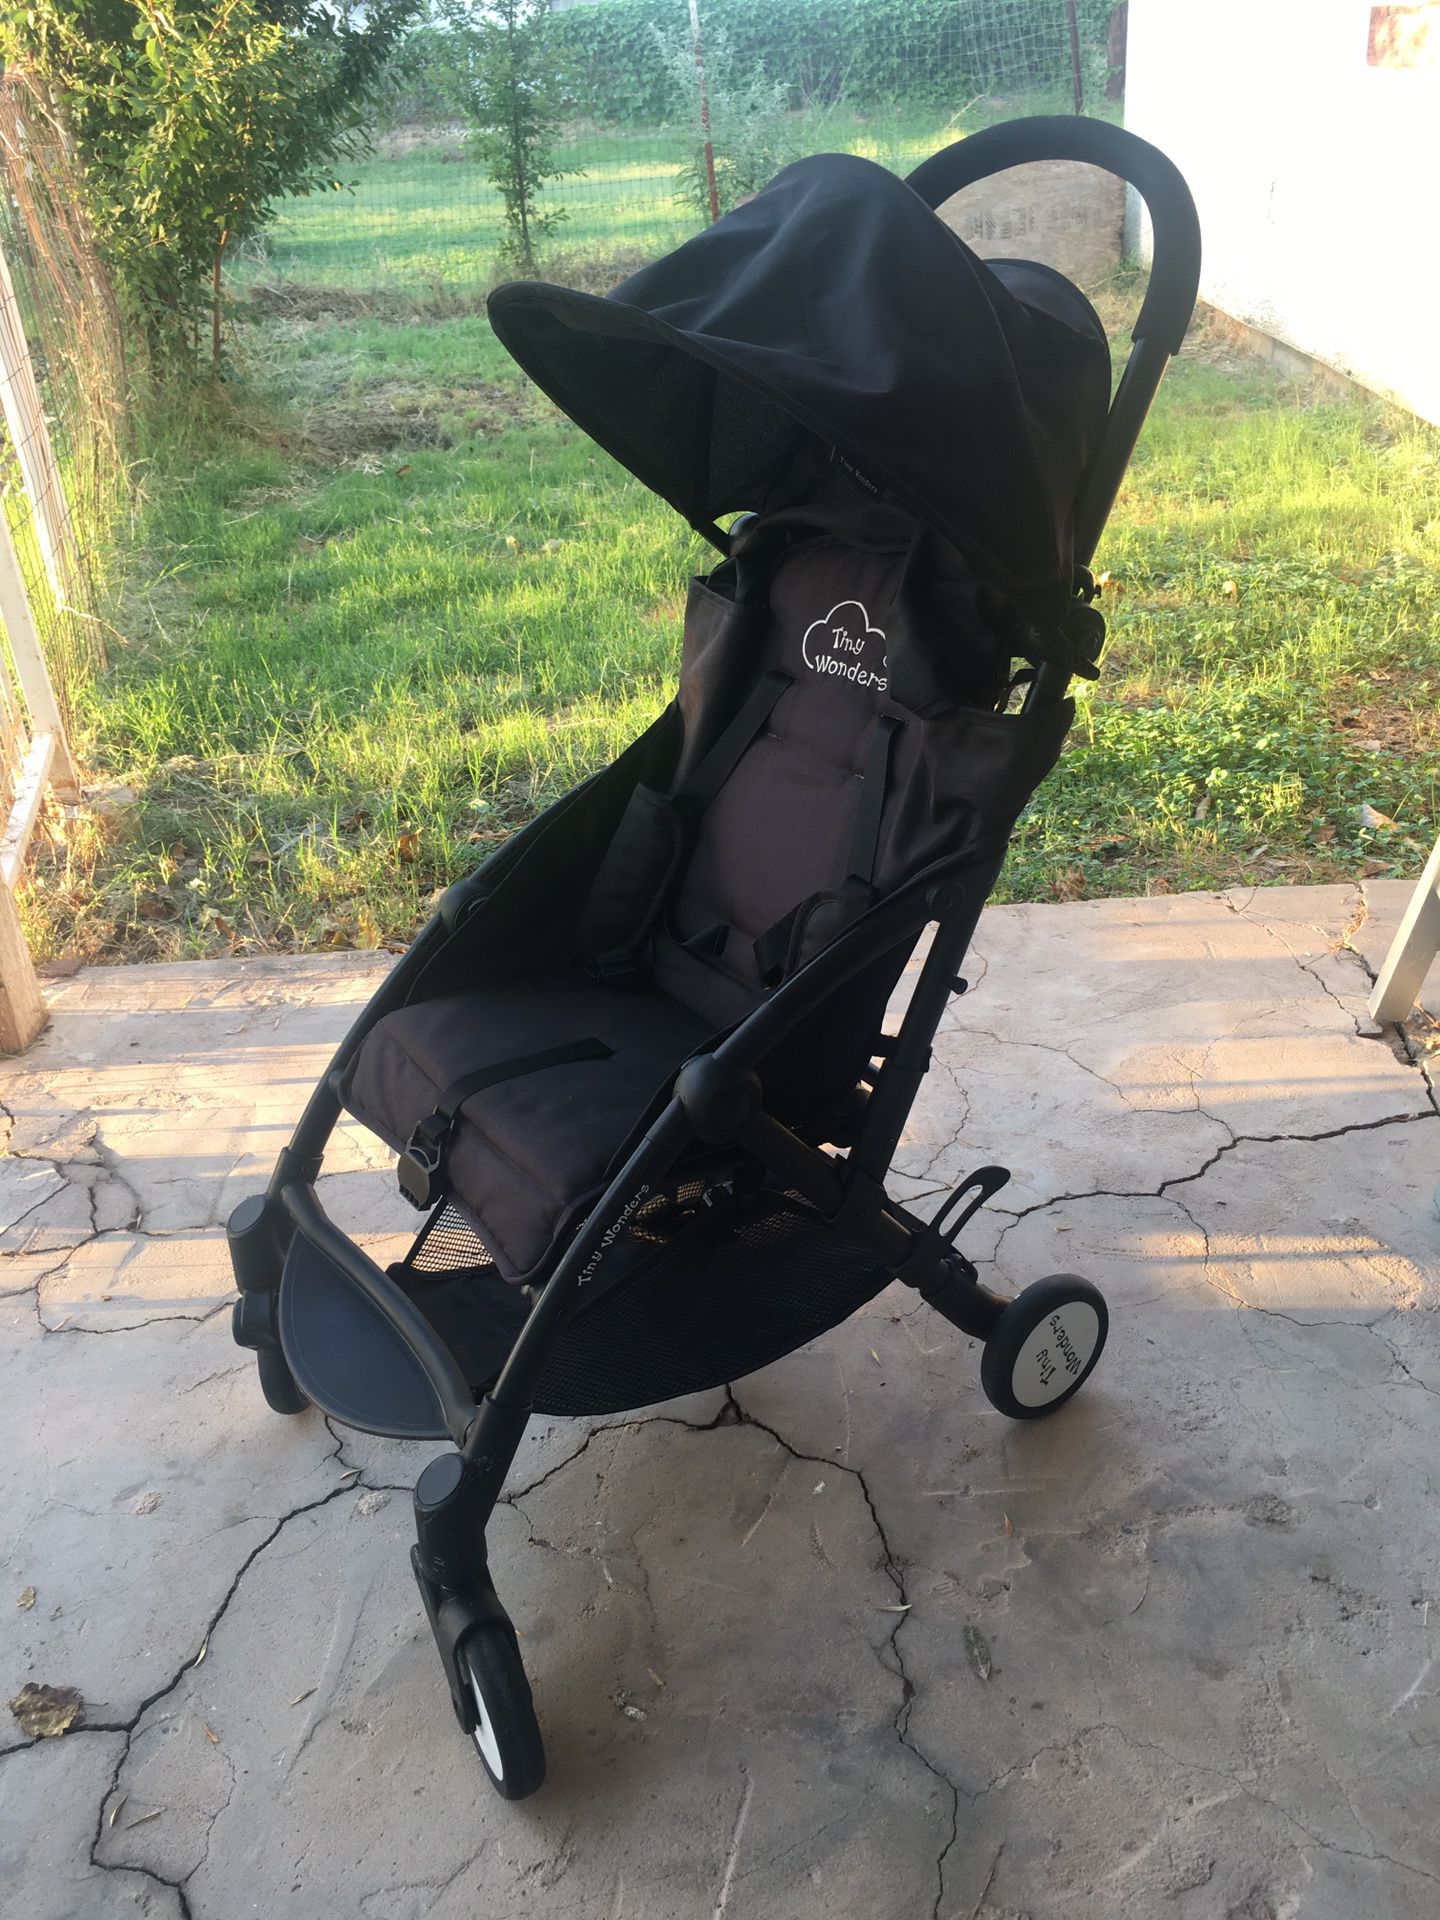 Tiny Wonders Stroller - Gently Used - Perfect Condition- Clean!